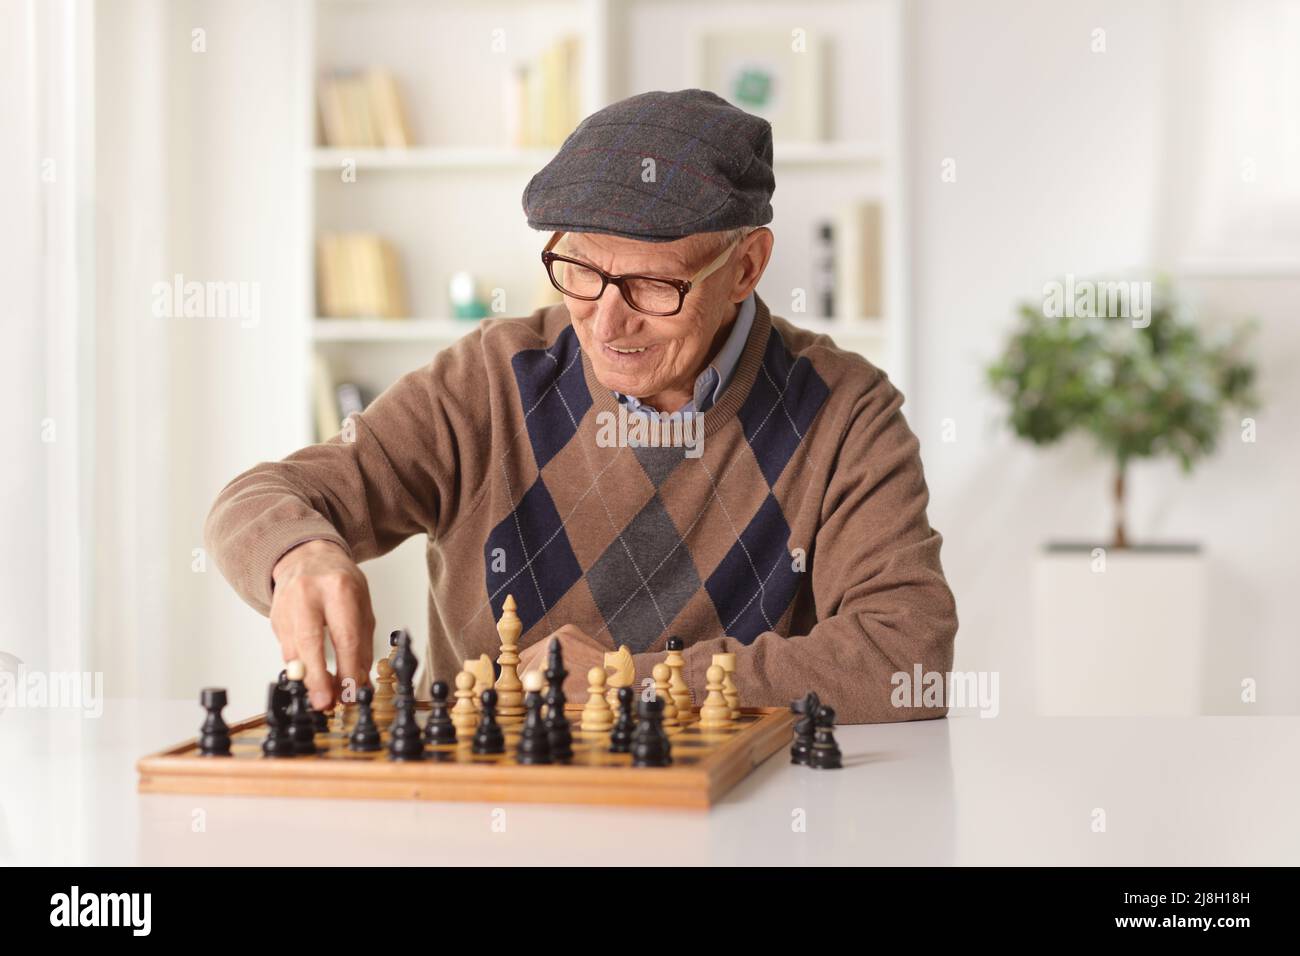 Elderly man sitting at home and playing chess Stock Photo